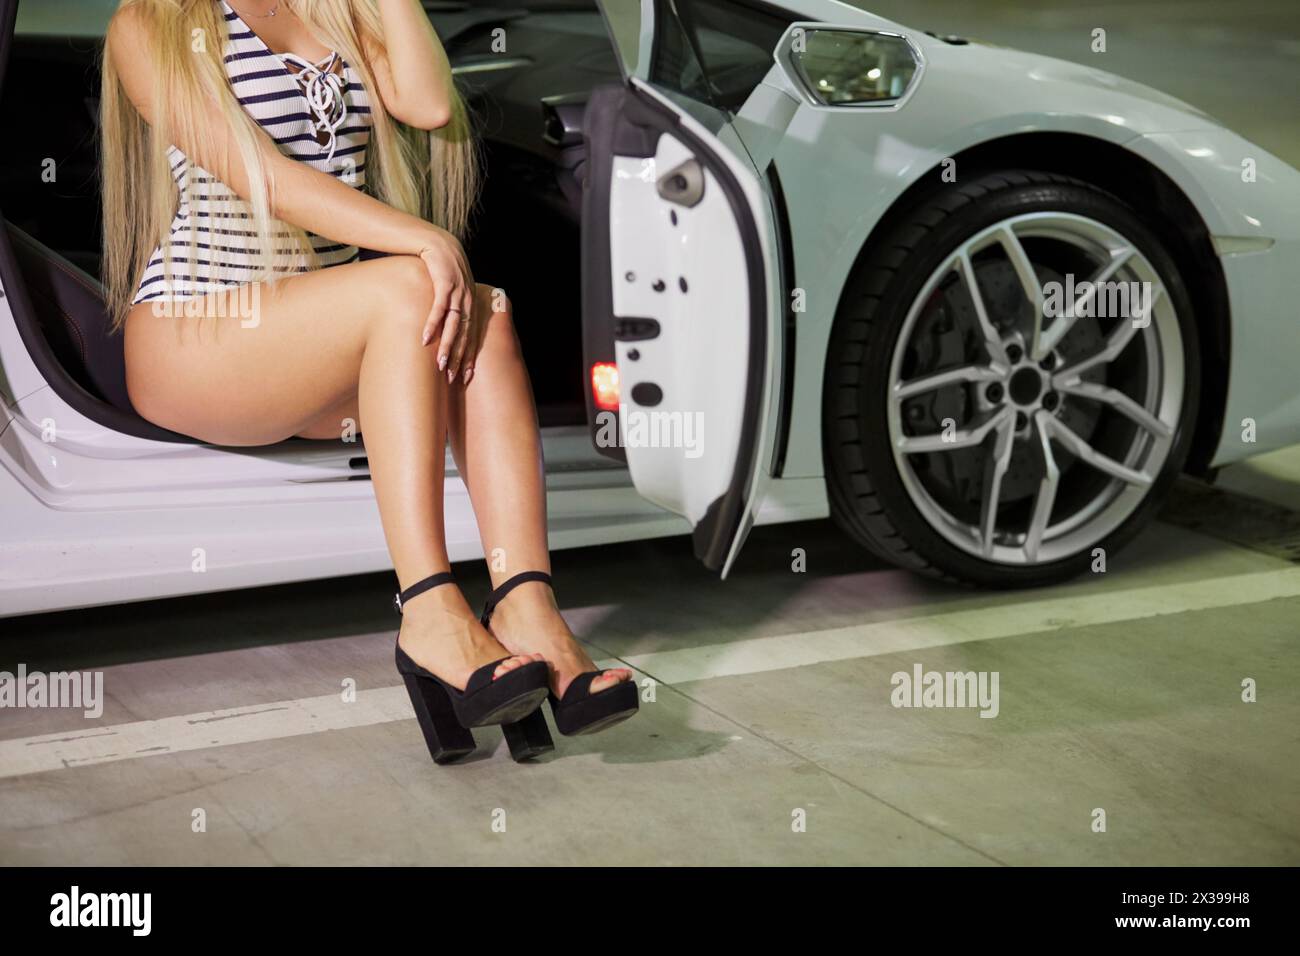 Young blonde woman in striped bodysuit and high-heel shoes poses sitting on passenger seat of modern white car at underground parking. Stock Photo